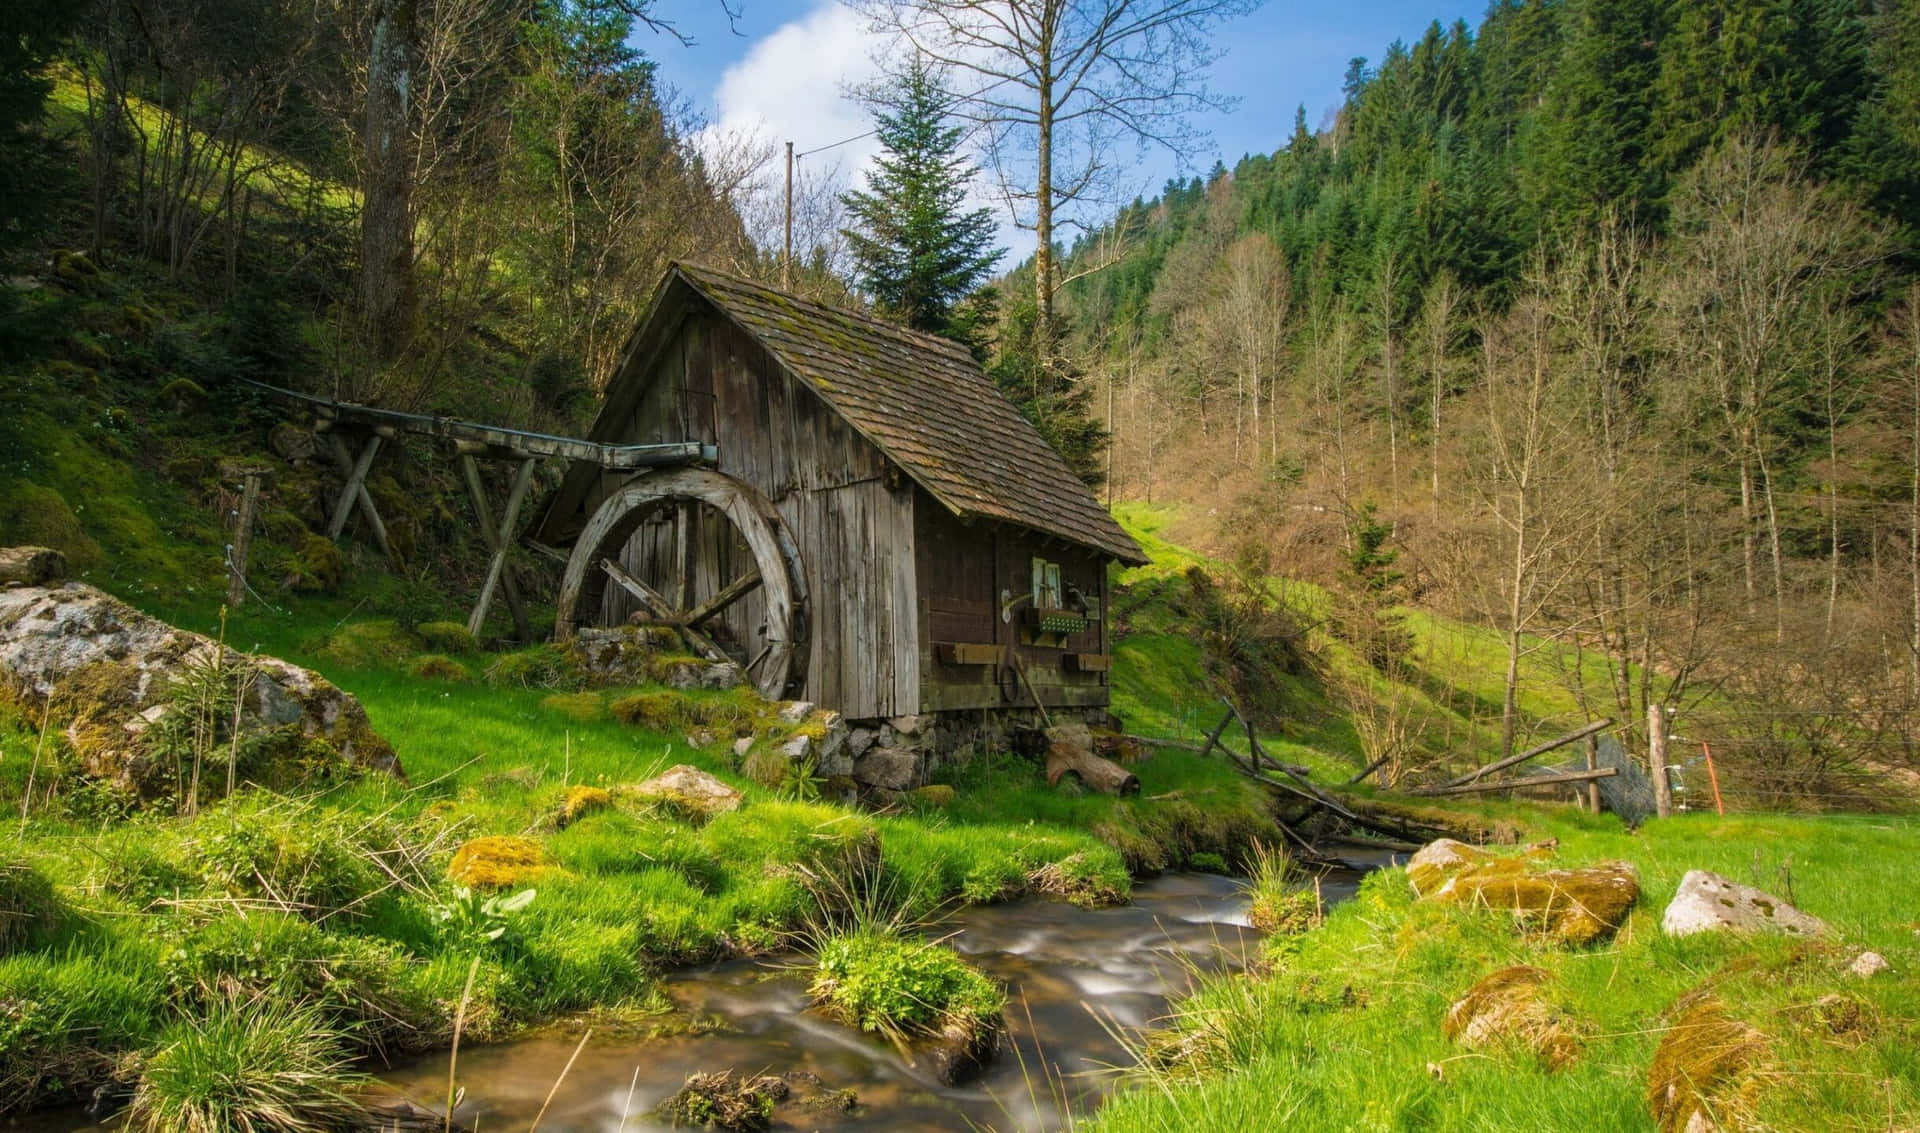 a small wooden mill in the middle of a green forest